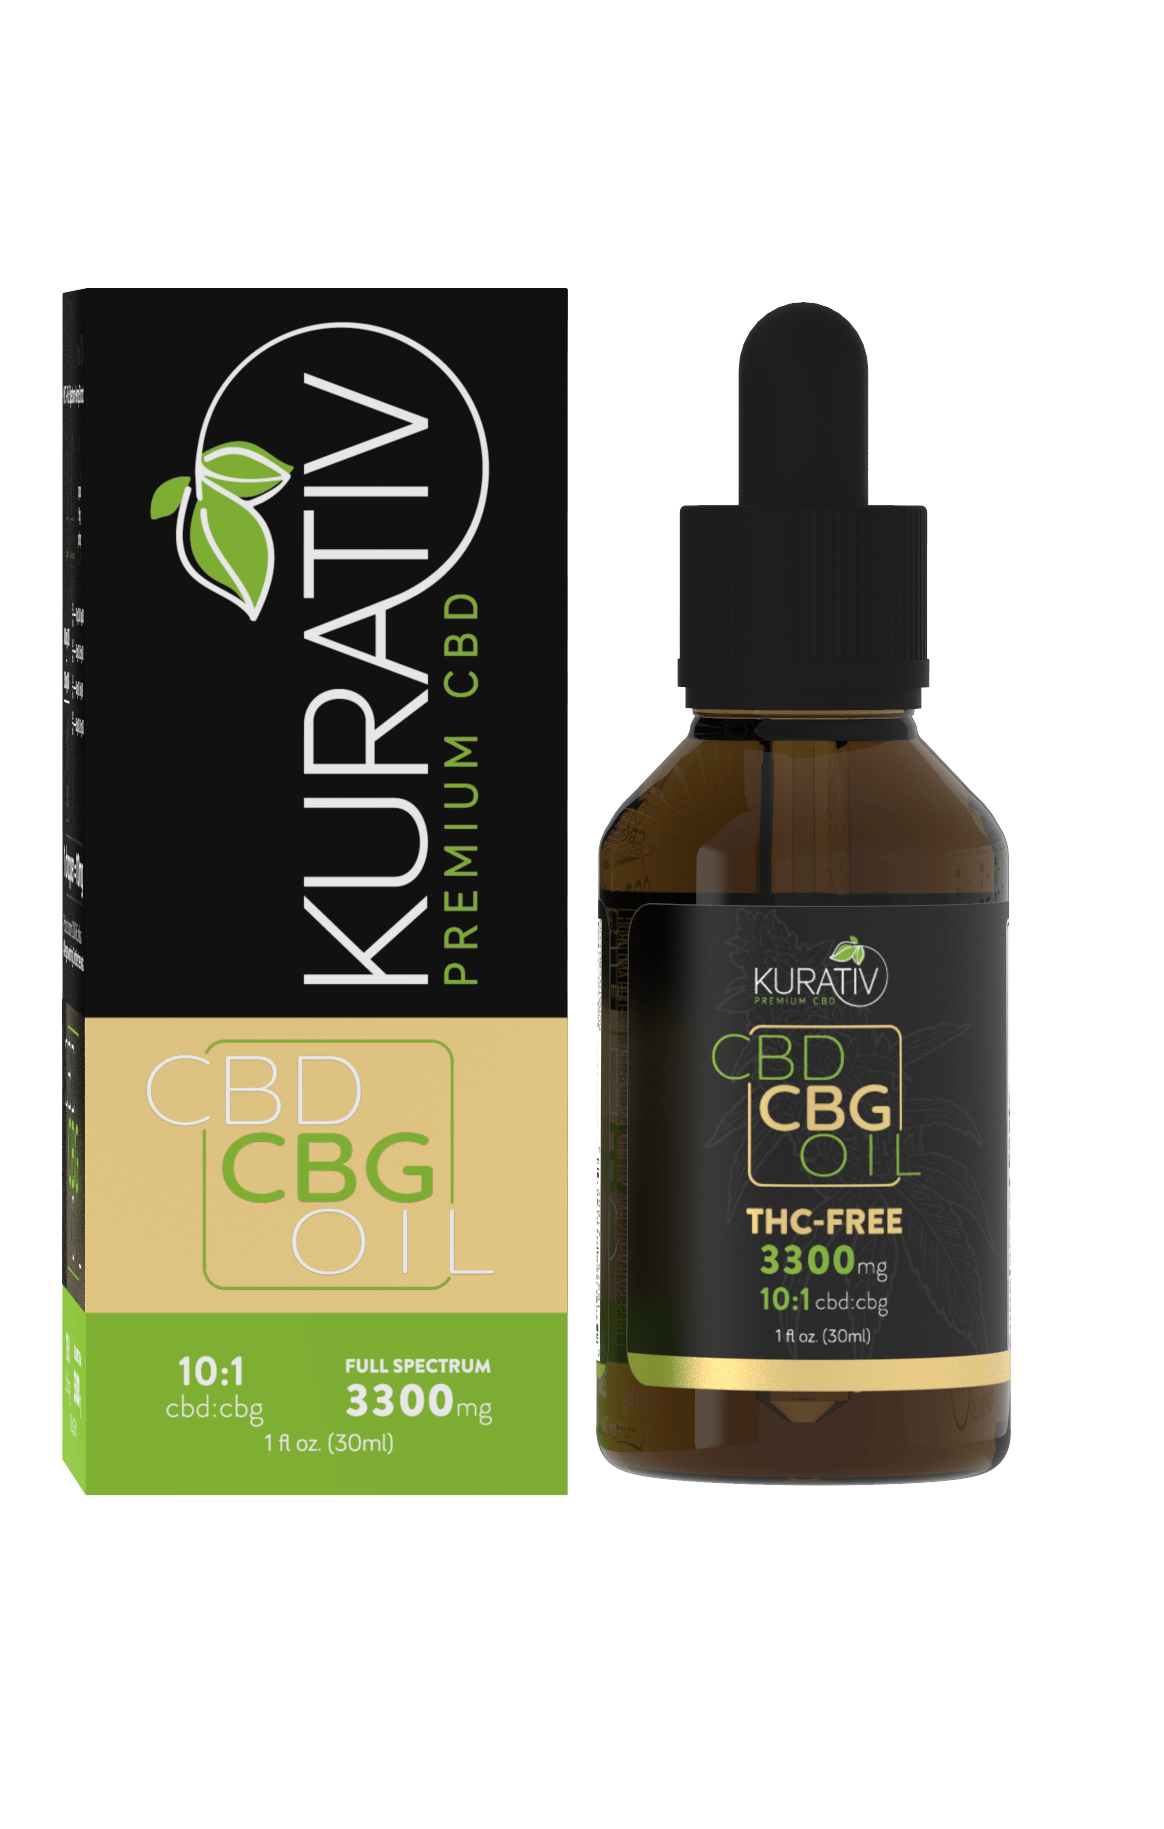 lcdfashiondesign: Is Cbd Or Cbg Better For Anxiety